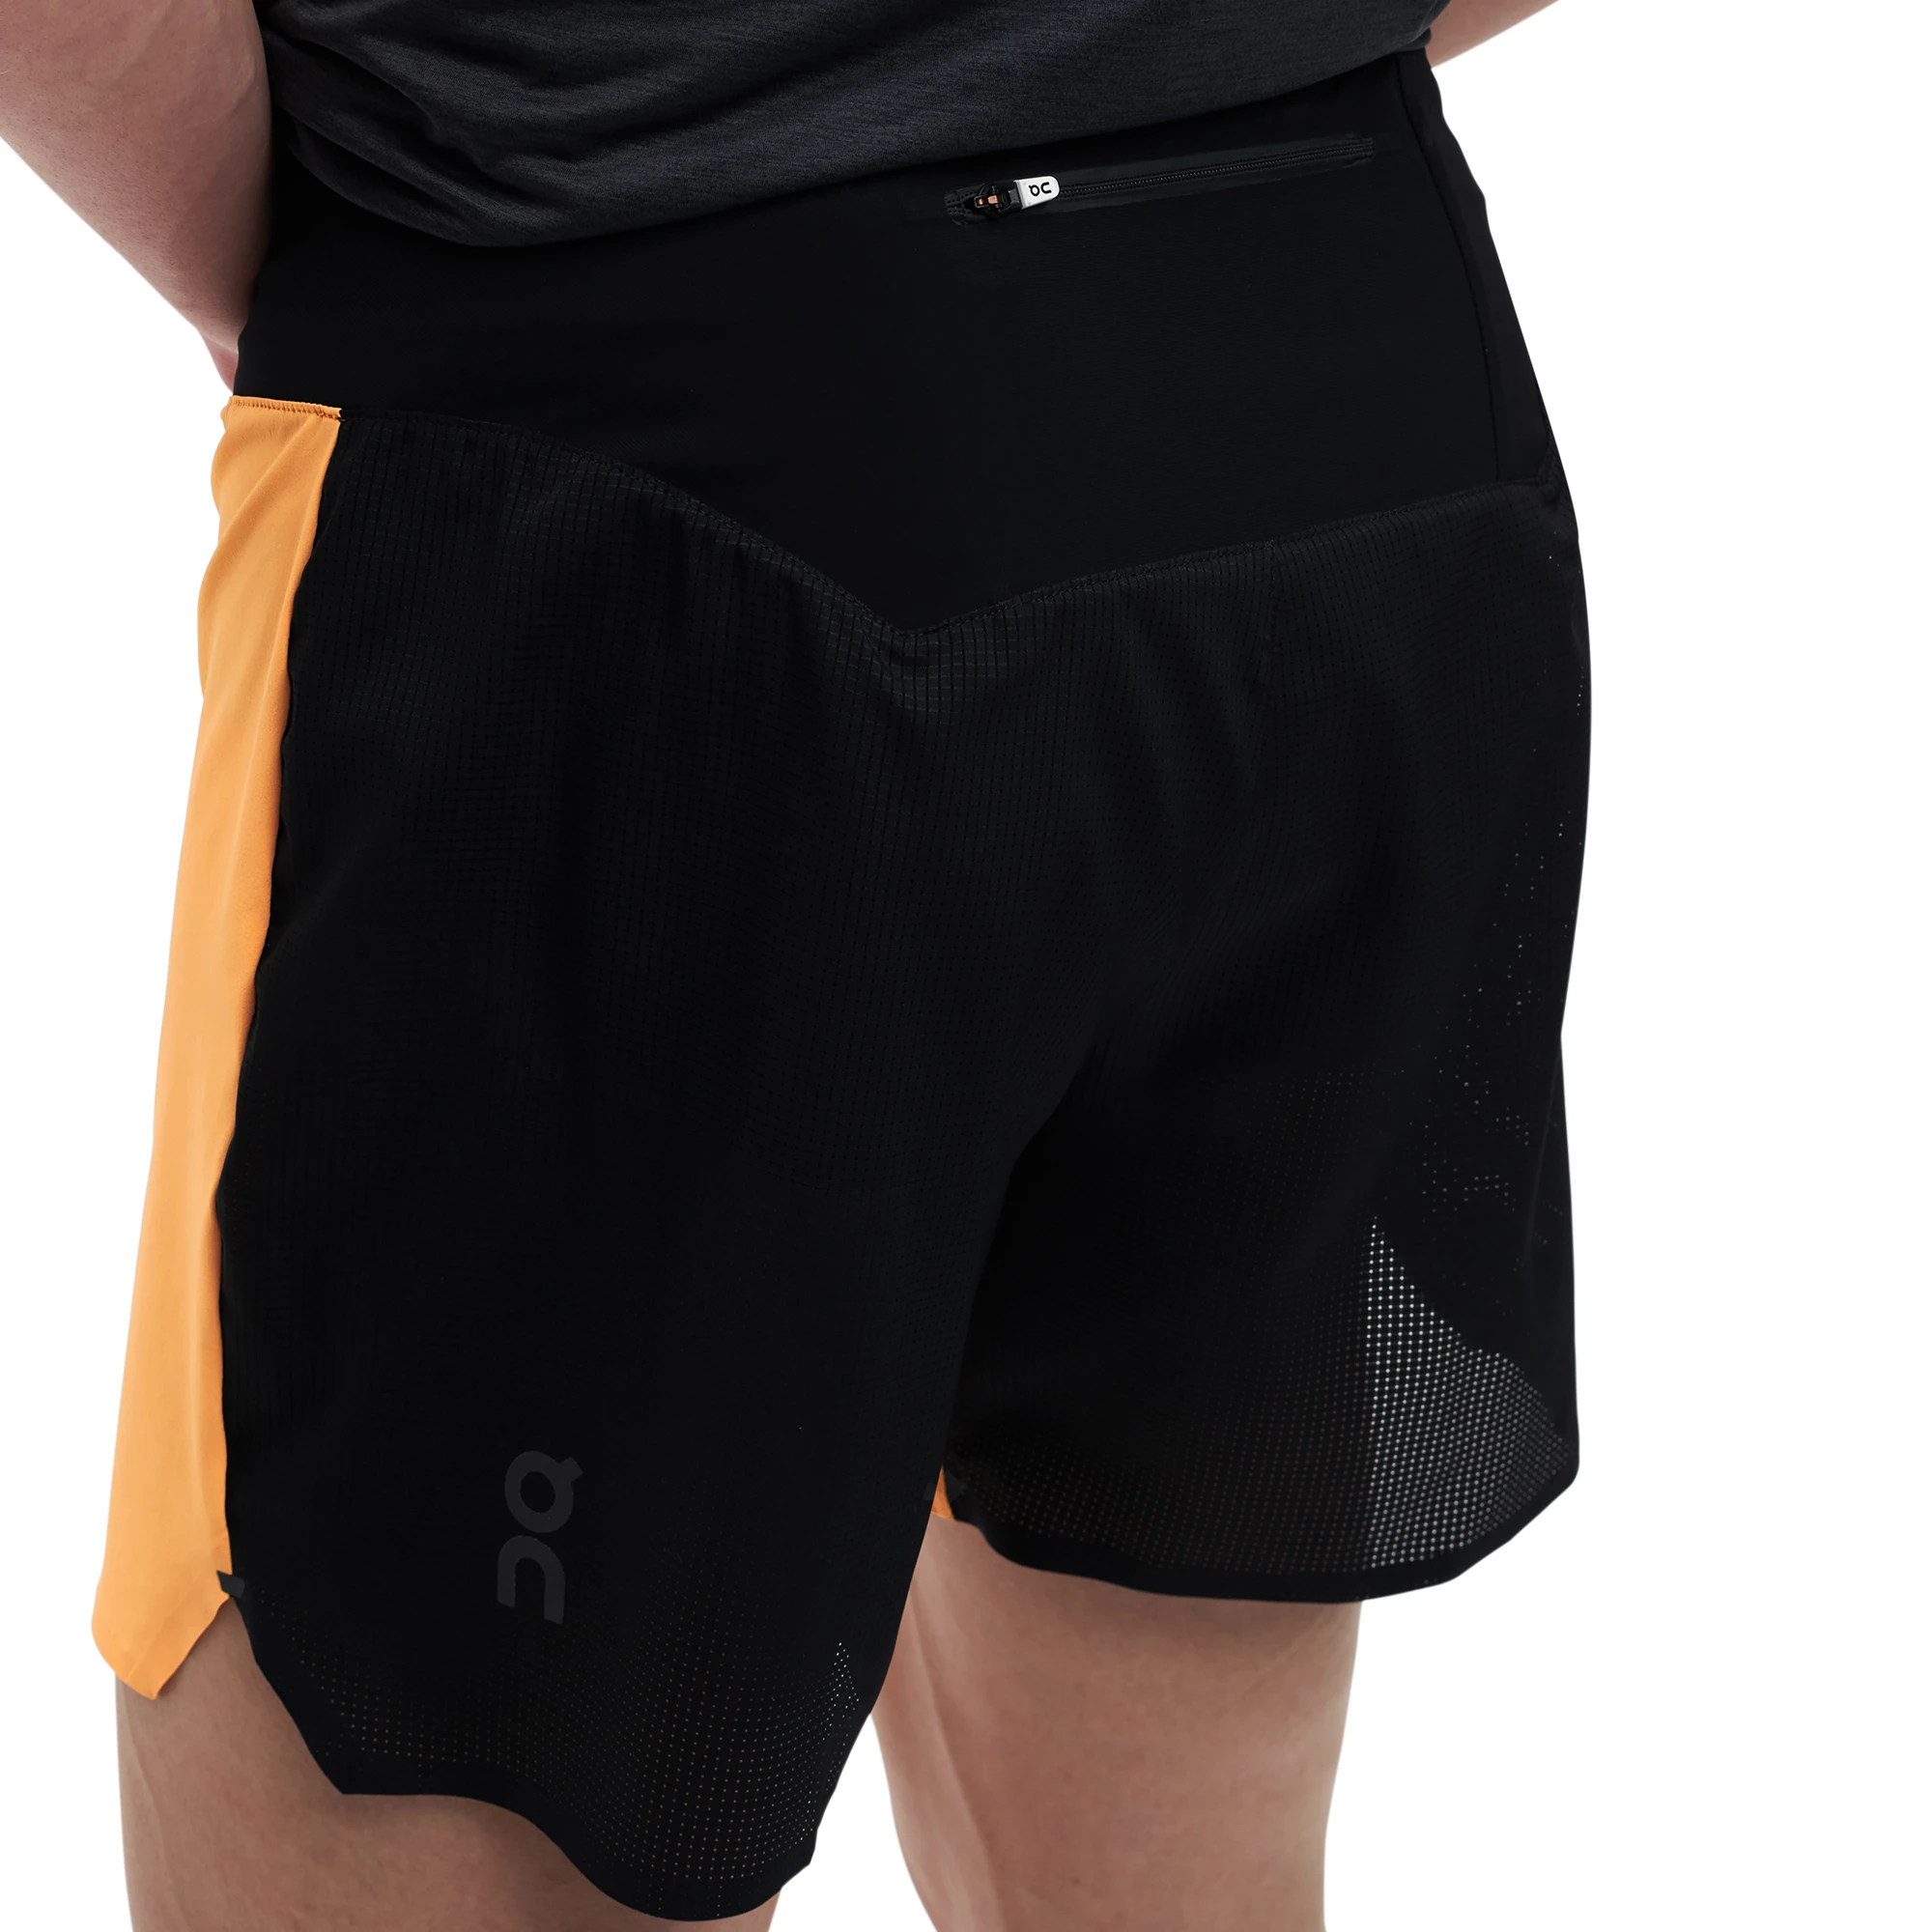 FEDTOSING Running Workout Shorts 5 Inches Quick Dry Lightweight